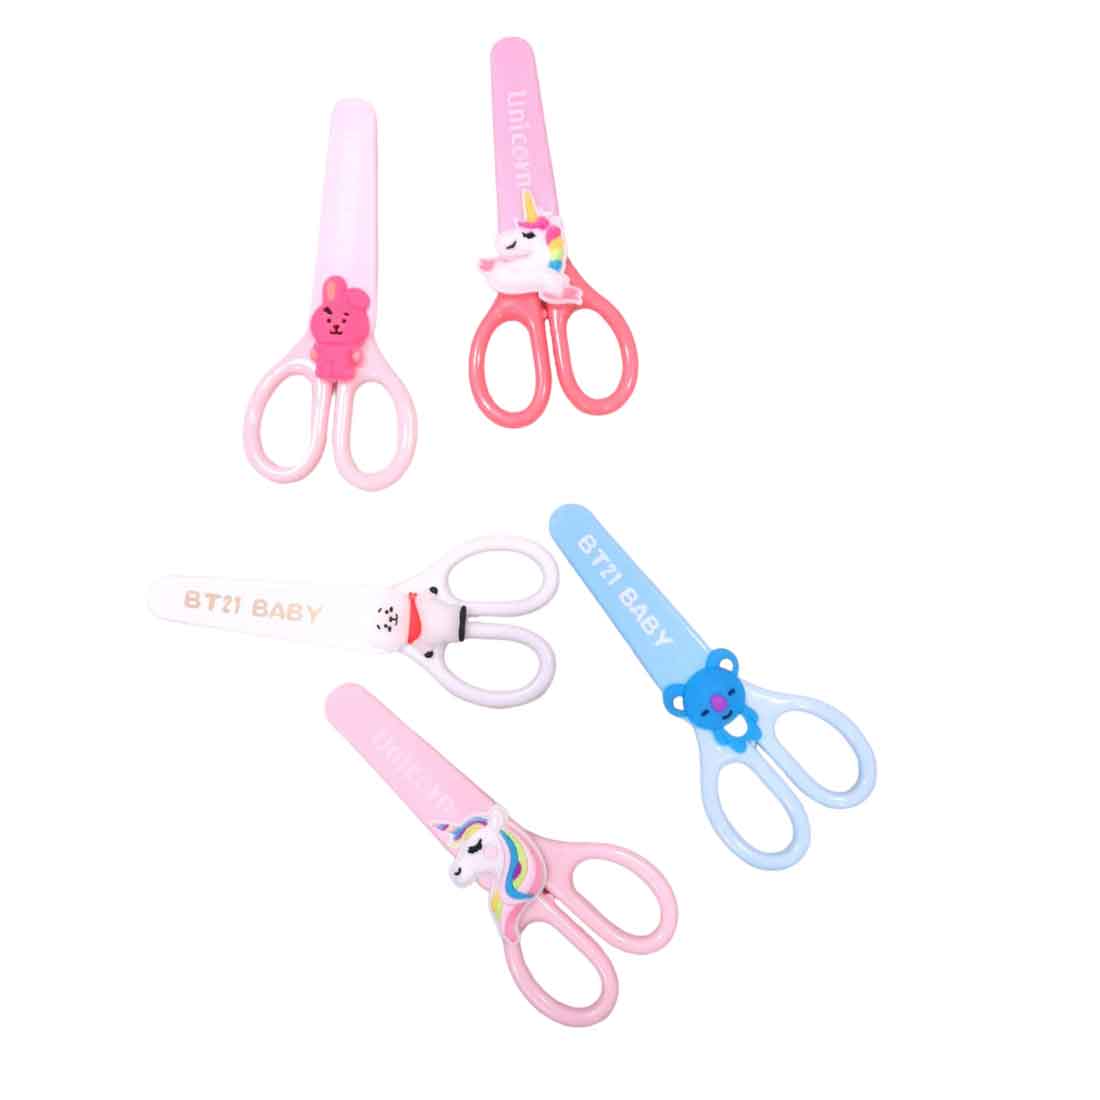 Unicorn Scissors with Cover | Kids-Friendly Craft Scissors in Assorted Colors – for School, Art and Craft (Pack of 3)